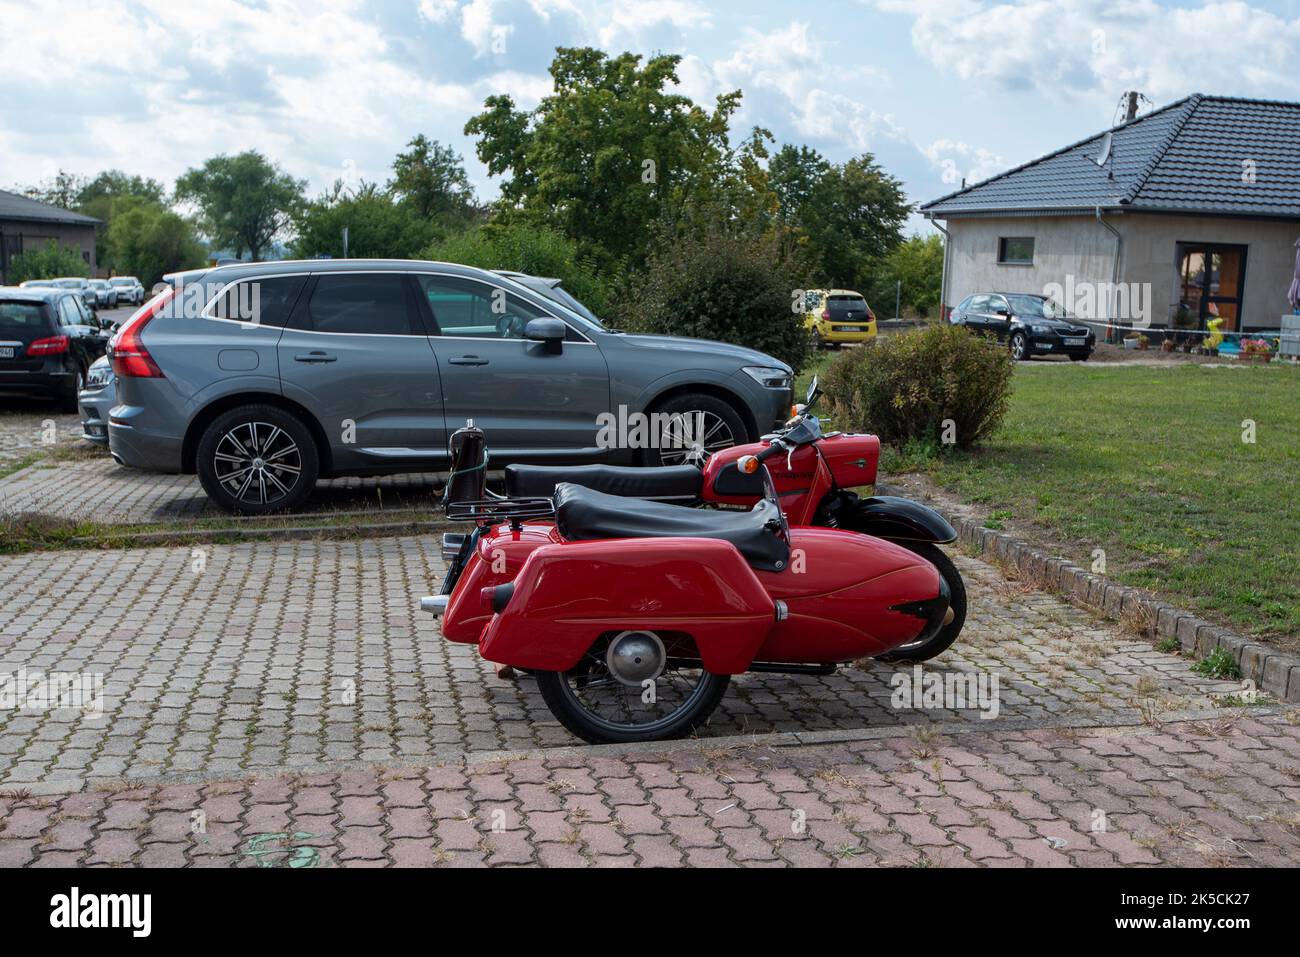 Moped MZ ES 250 sidecar, Trophy, sidecar, GDR, Germany Stock Photo